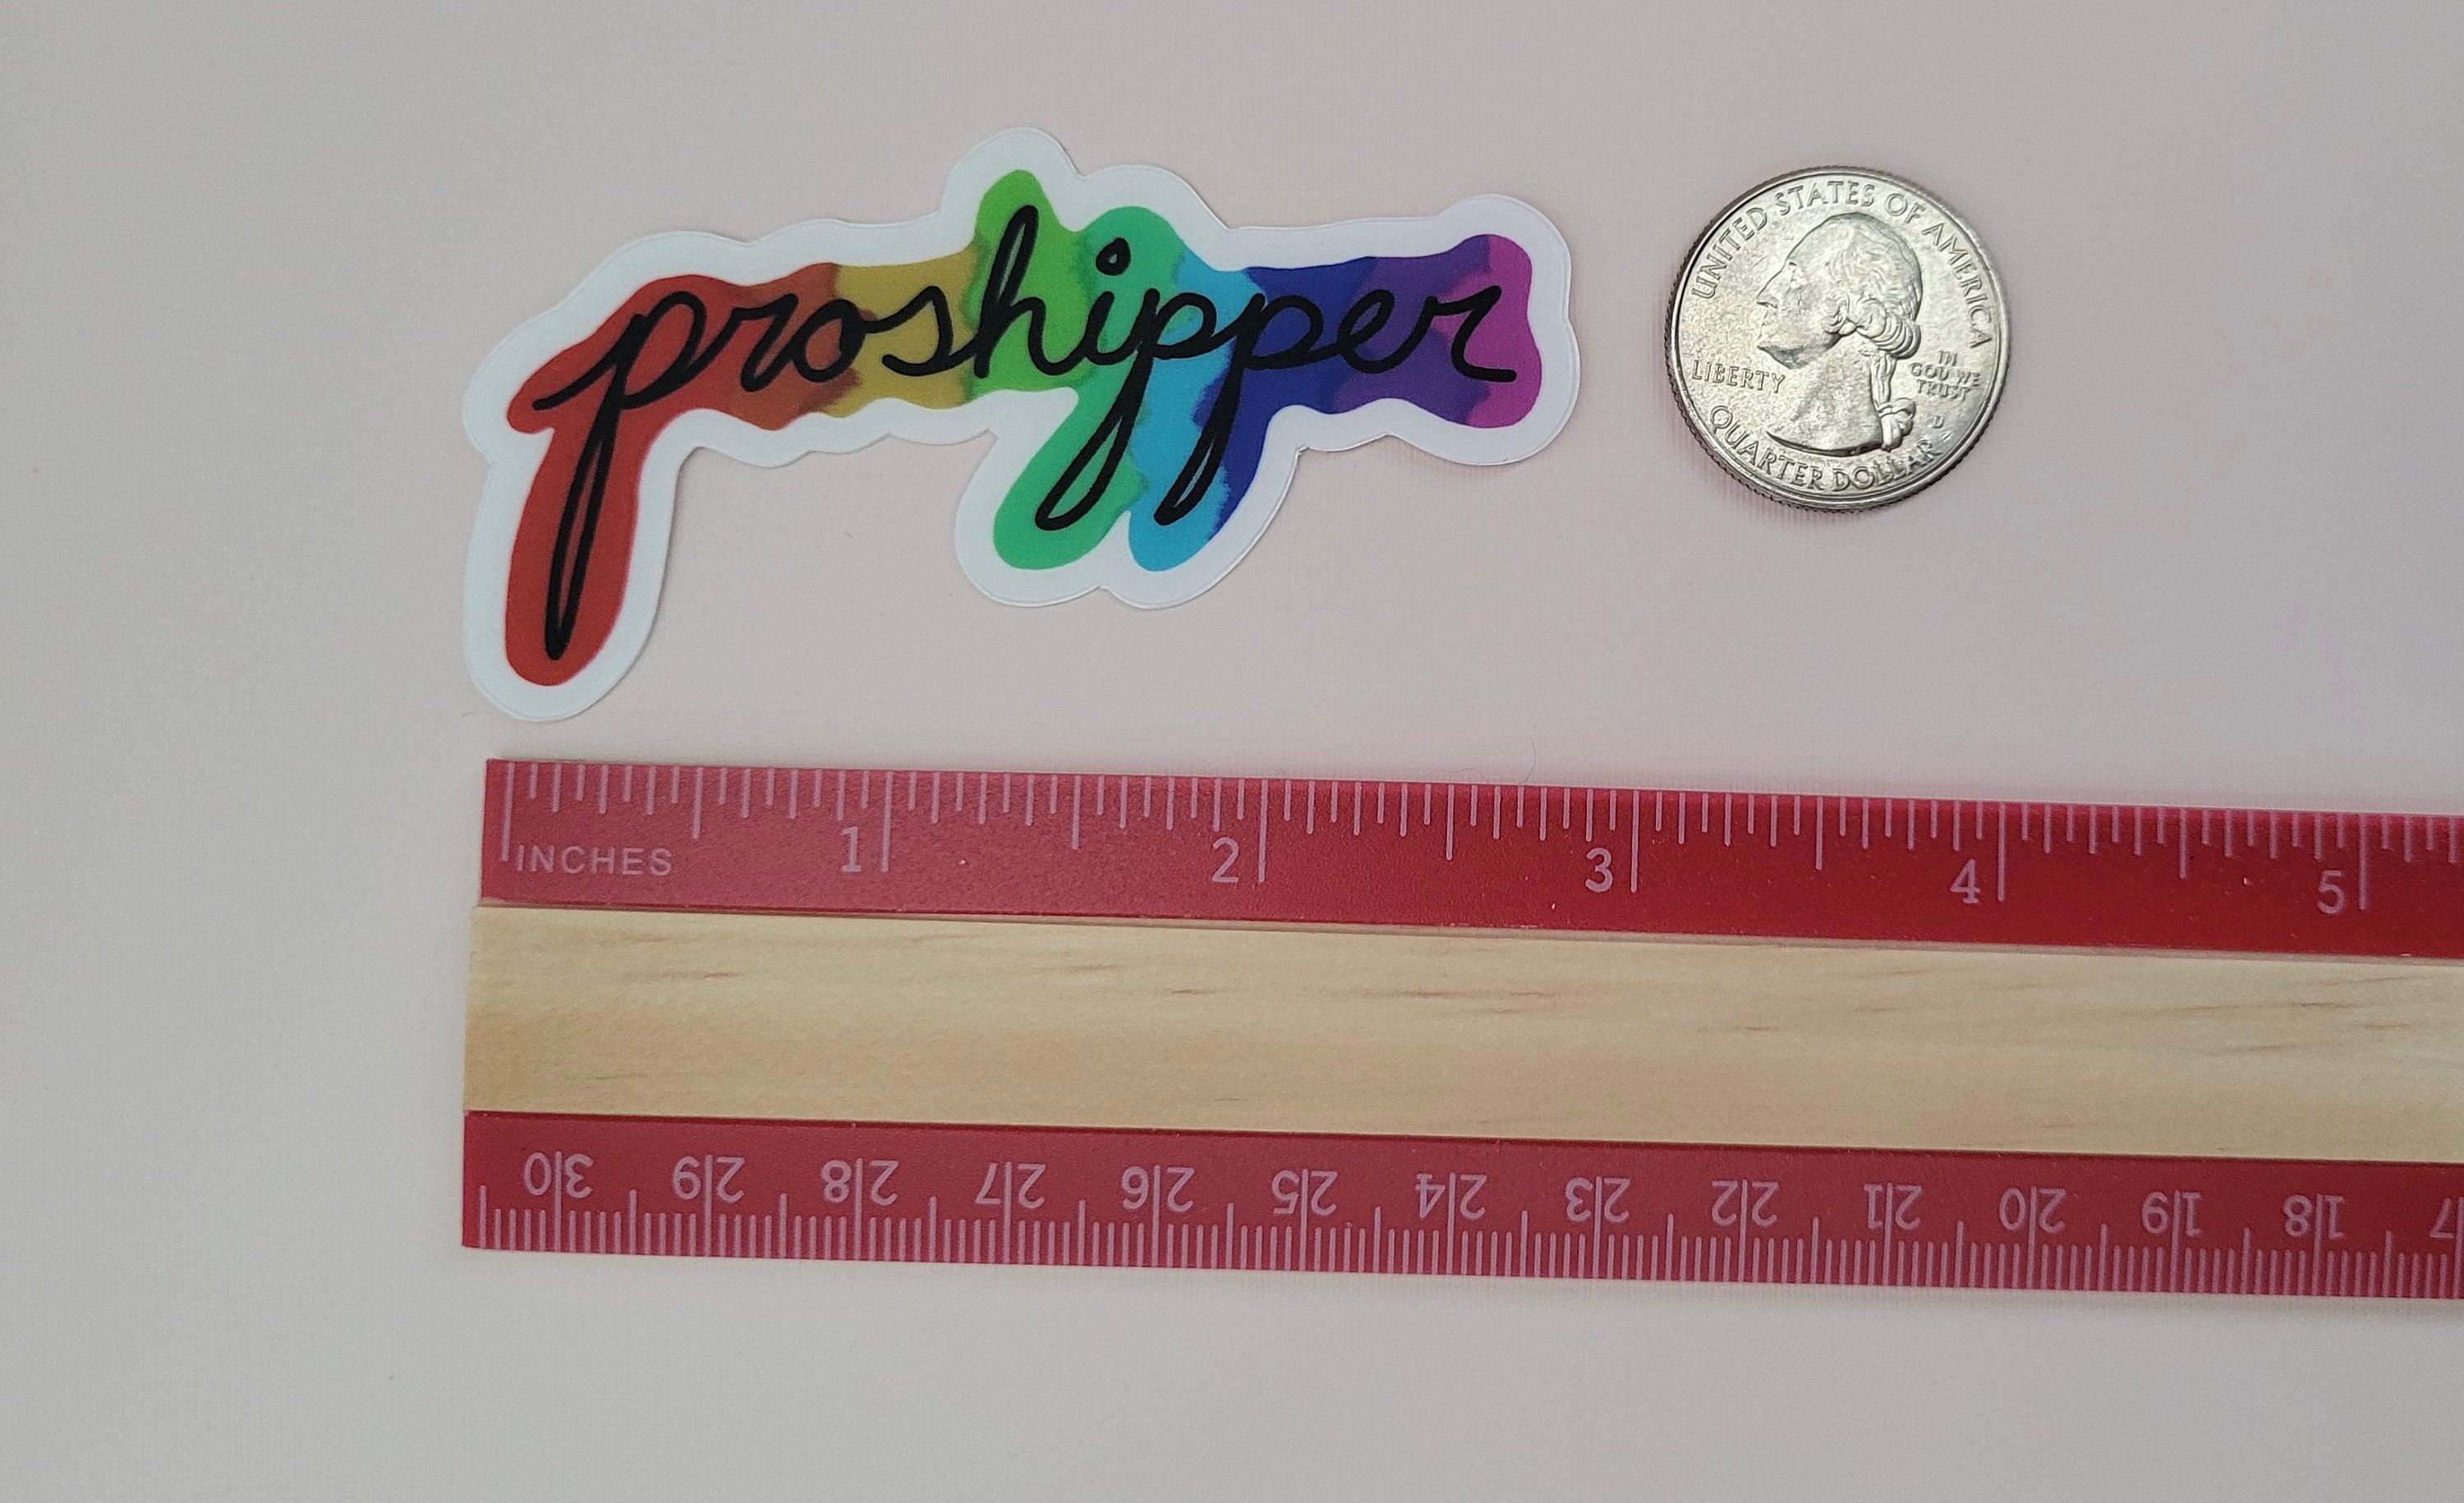 Rainbow holographic deco shape stickers — made by @heysp